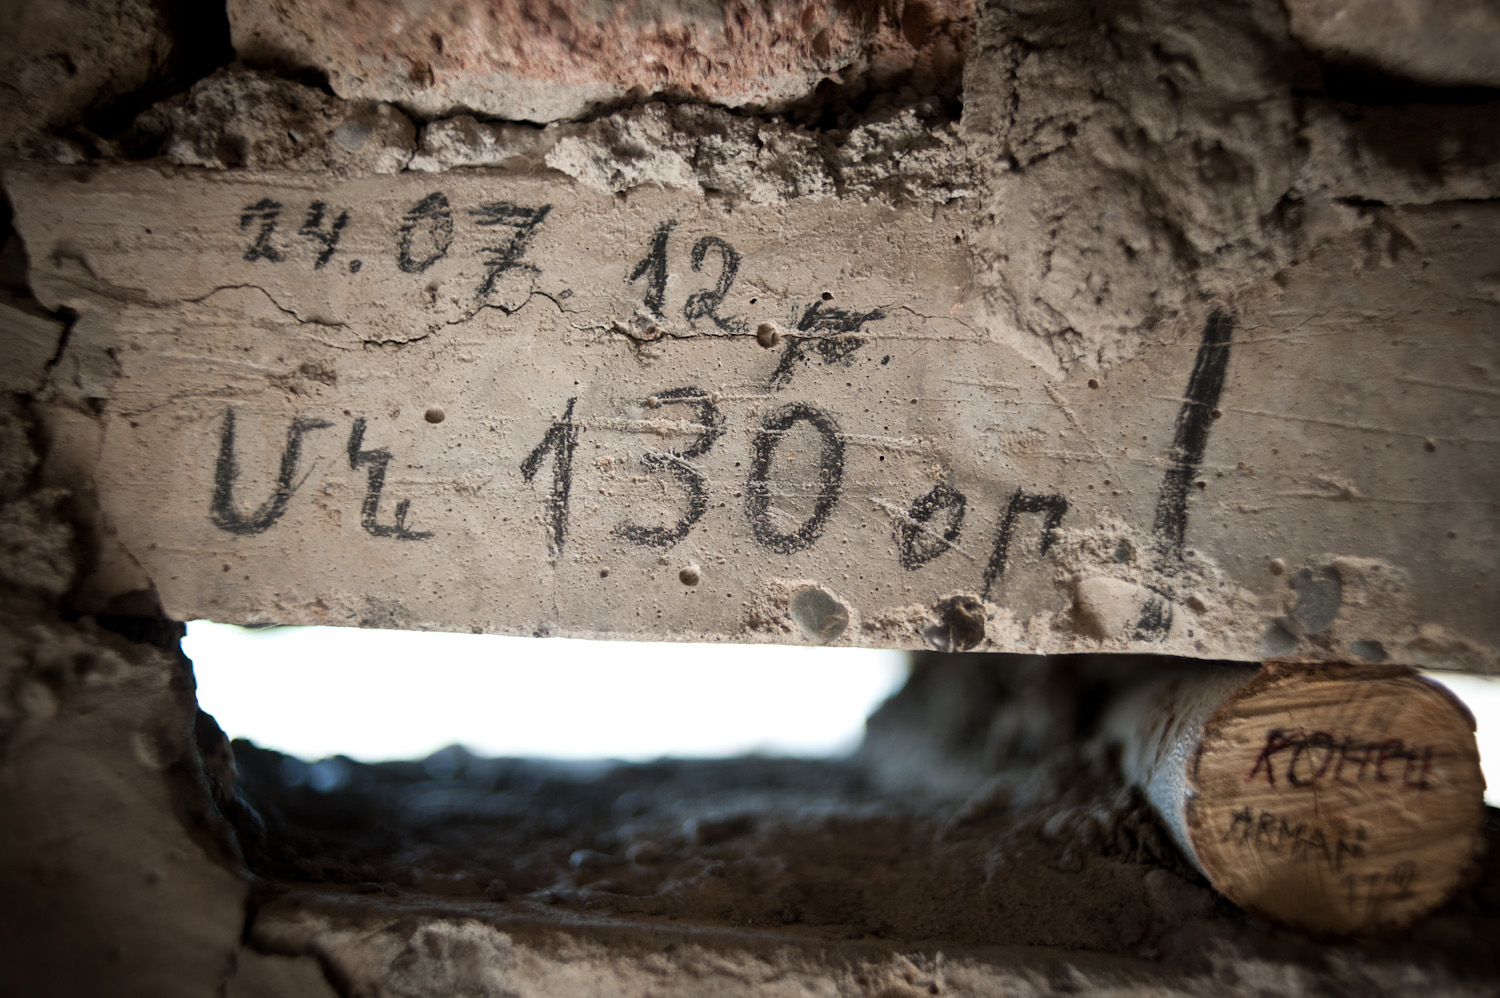  "130 days left" scribbled on the wall on the inside of a lookout point at the border with Iran, Southern Nagorno-Karabakh.  